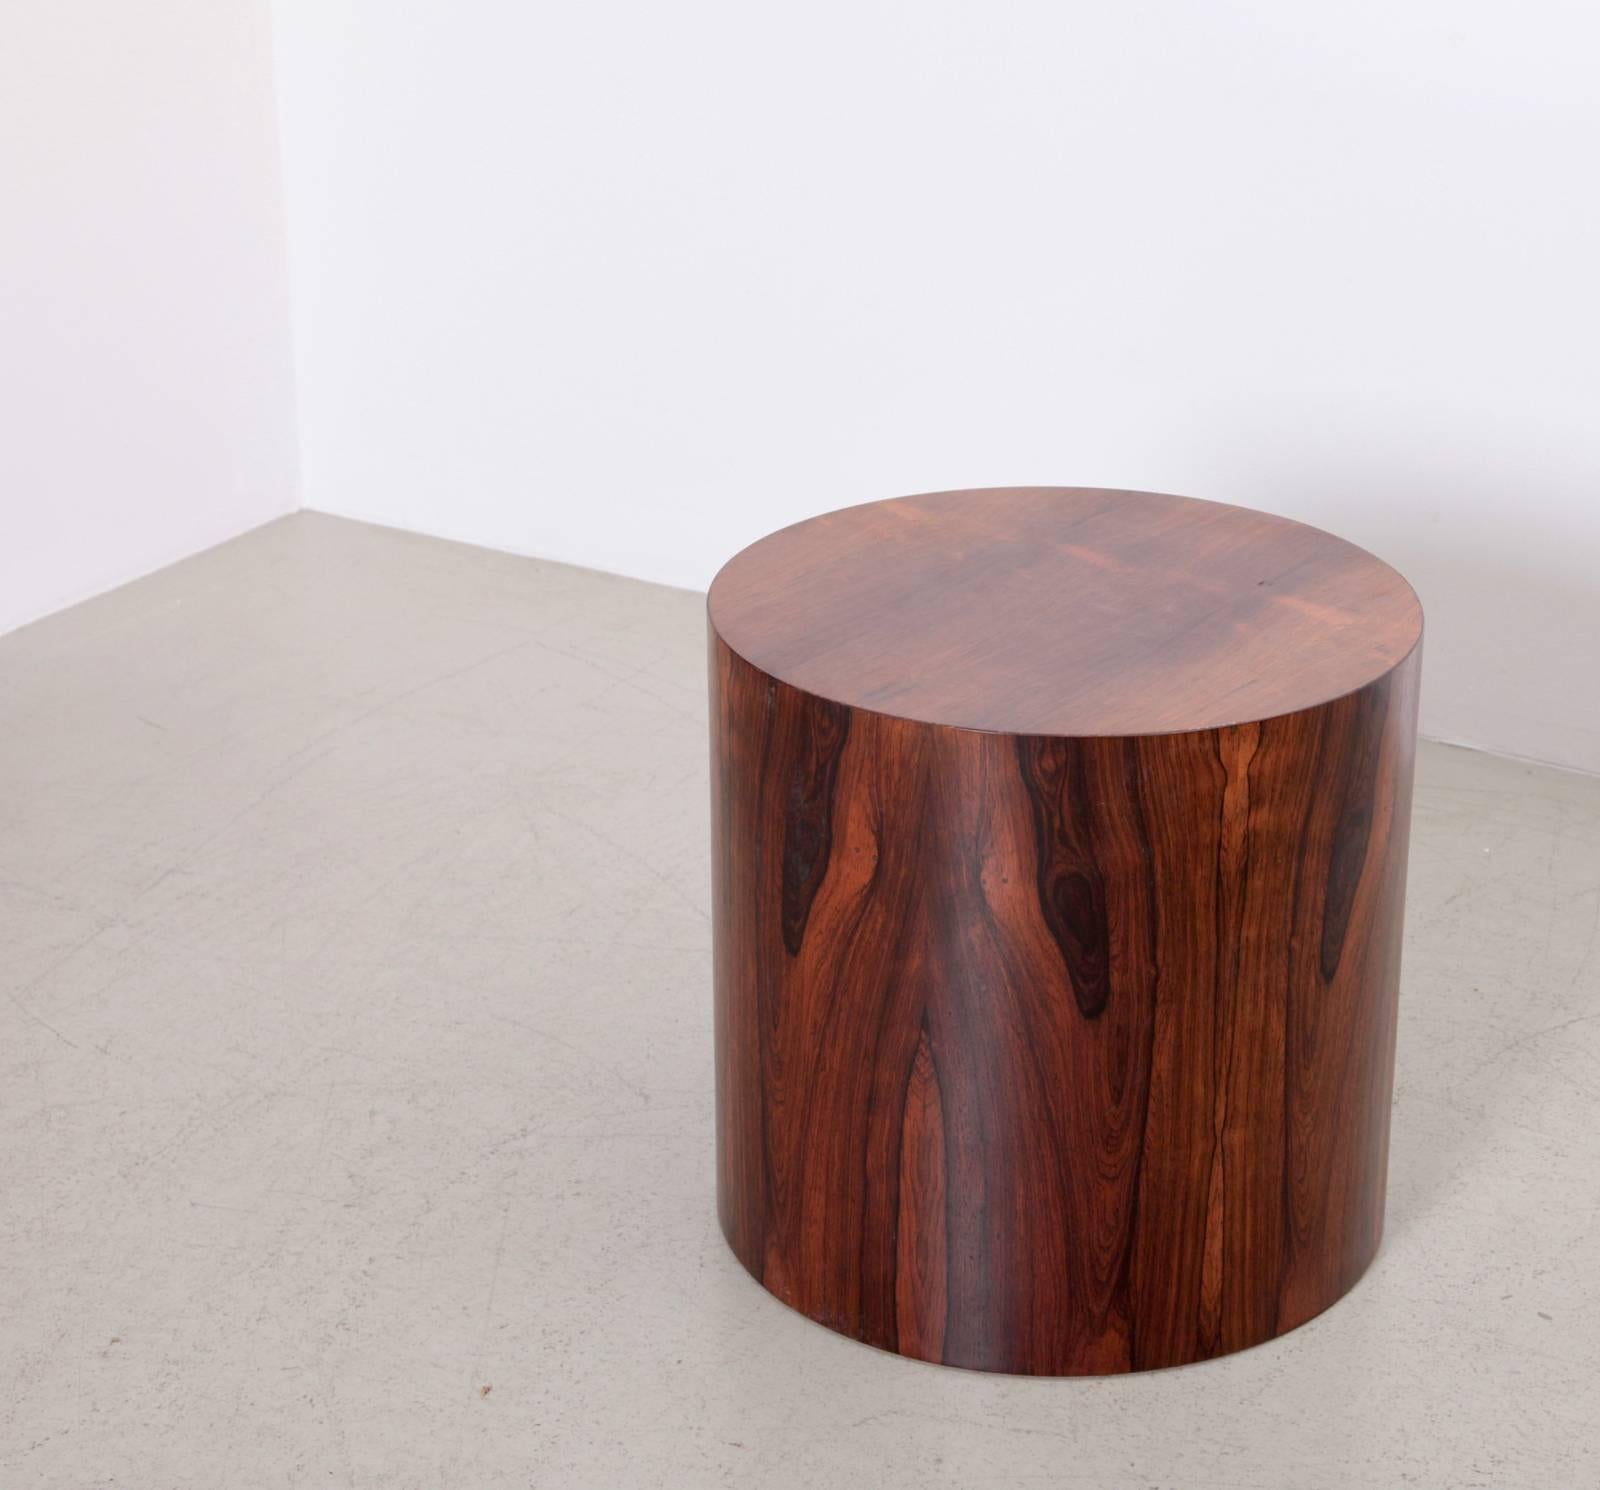 This Mid-Century modern side table designed by Milo Baughman and made by Thayer Coggin. A round, drum-style design in rosewood with an outstanding and hard to find grain in very good condition.